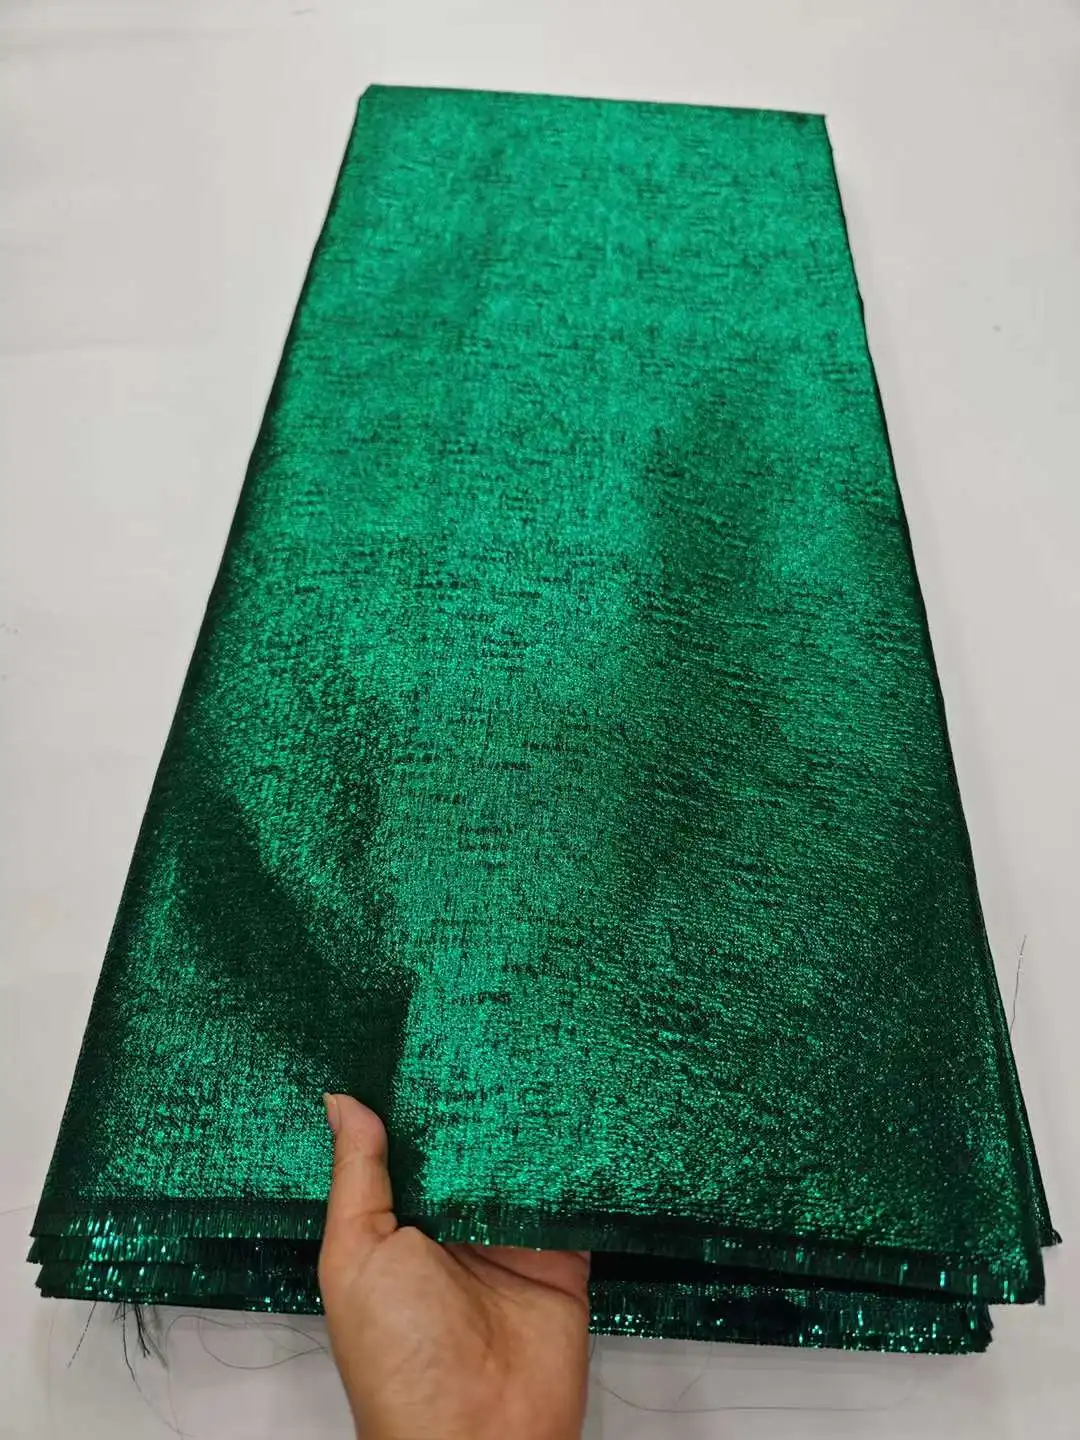 New Arrival African Brocade Lace Fabric Jacquard Organza Fabric High Quality Damask Jacquard for Wedding Evening Dresses 5yards